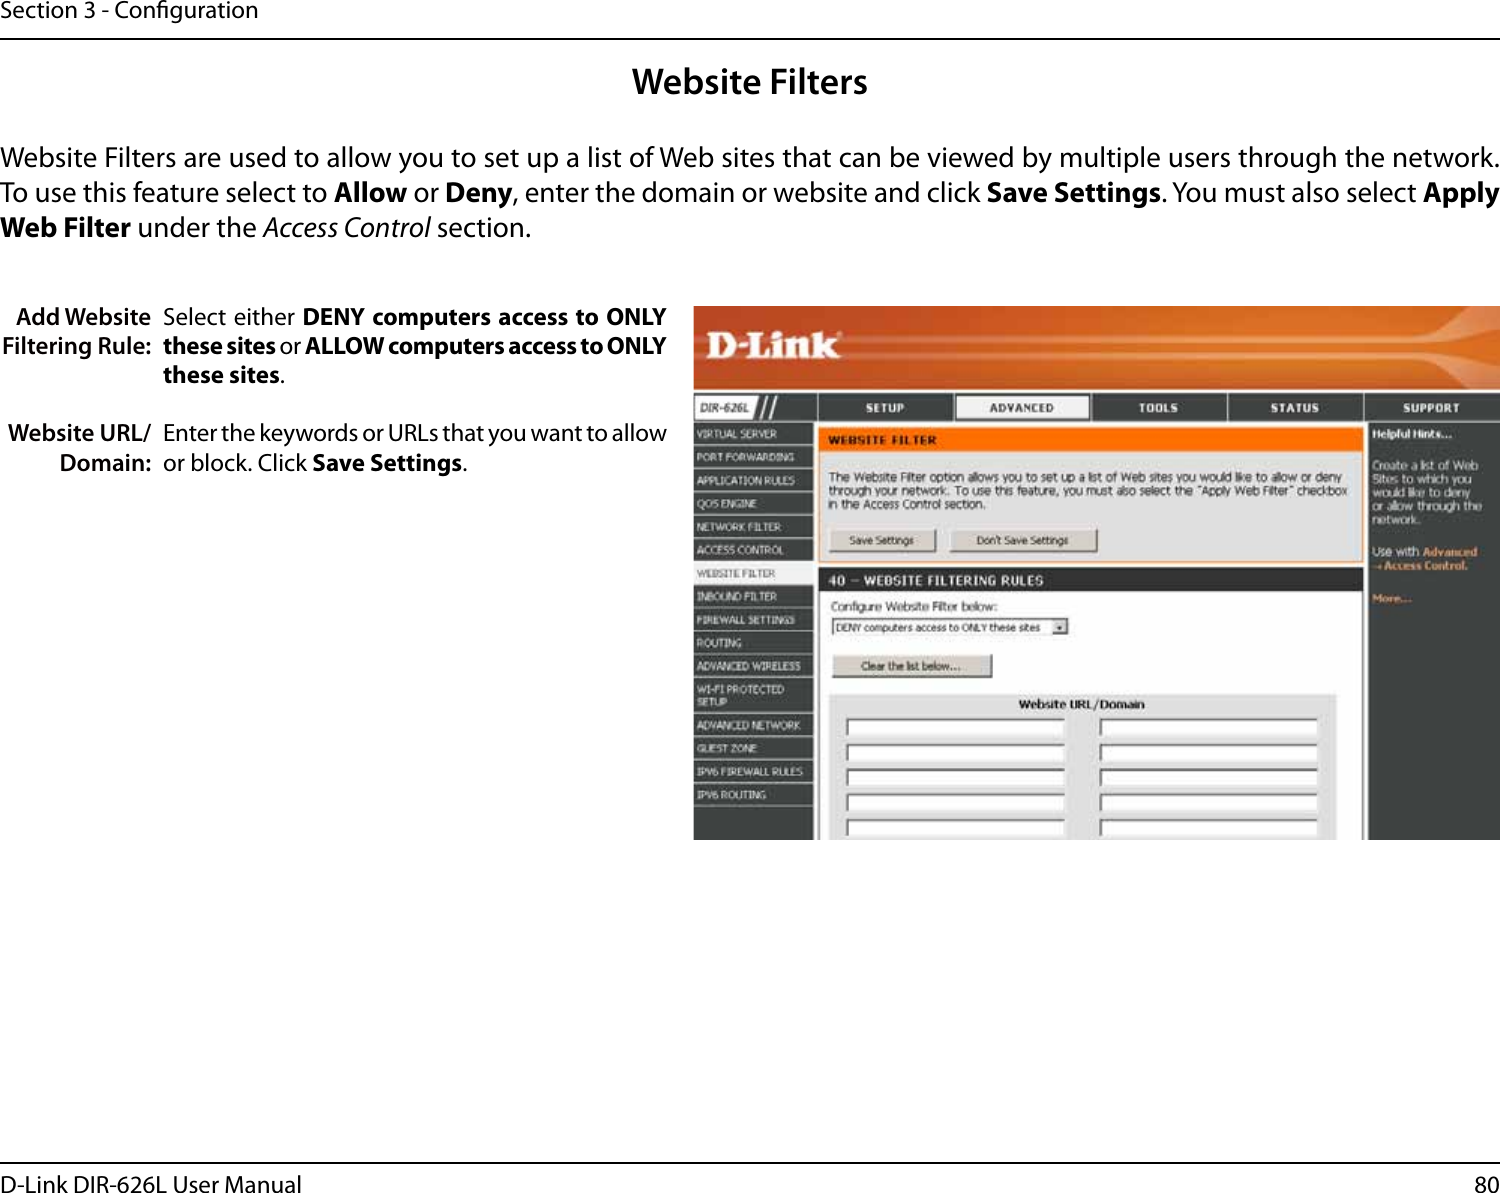 80D-Link DIR-626L User ManualSection 3 - CongurationAdd Website Filtering Rule:Website URL/Domain:Website FiltersSelect either DENY computers access to ONLY these sites or ALLOW computers access to ONLY these sites.Enter the keywords or URLs that you want to allow or block. Click Save Settings.Website Filters are used to allow you to set up a list of Web sites that can be viewed by multiple users through the network. To use this feature select to Allow or Deny, enter the domain or website and click Save Settings. You must also select Apply Web Filter under the Access Control section.